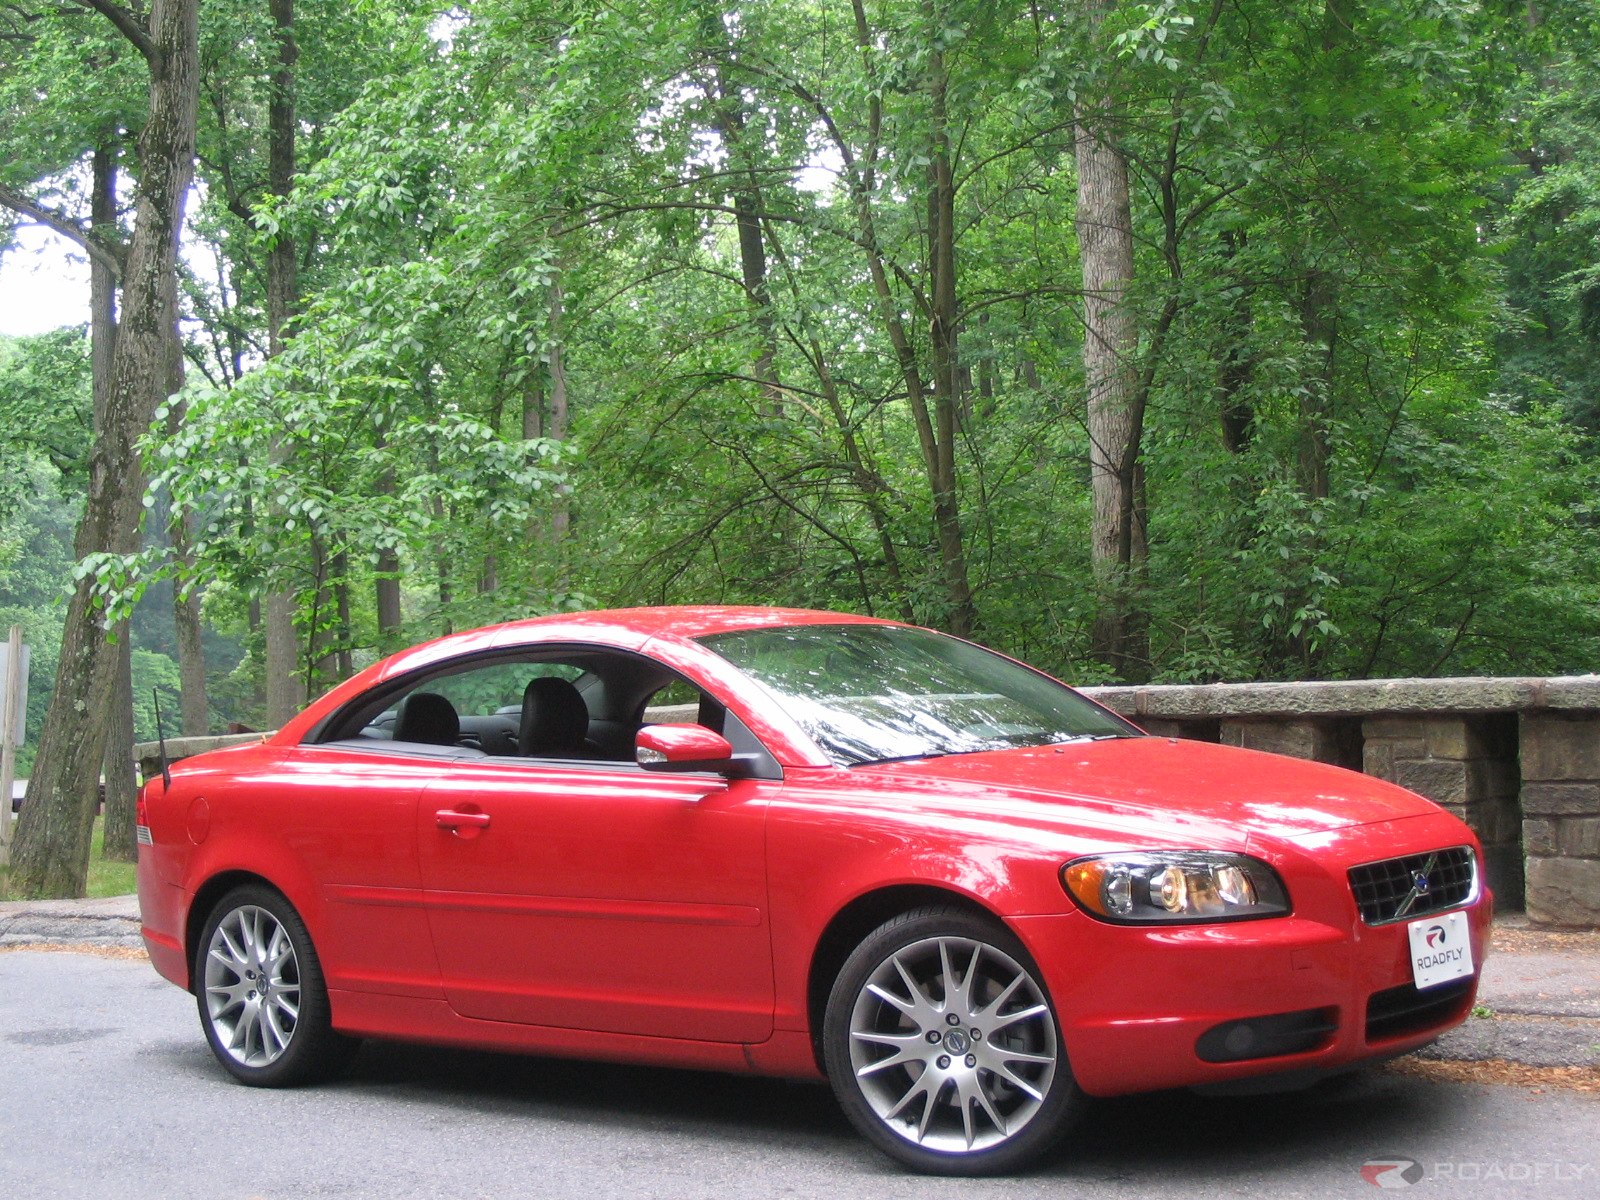 volvo-c70.jpg. Yeah, it looks good. And what's more, it makes anyone behind